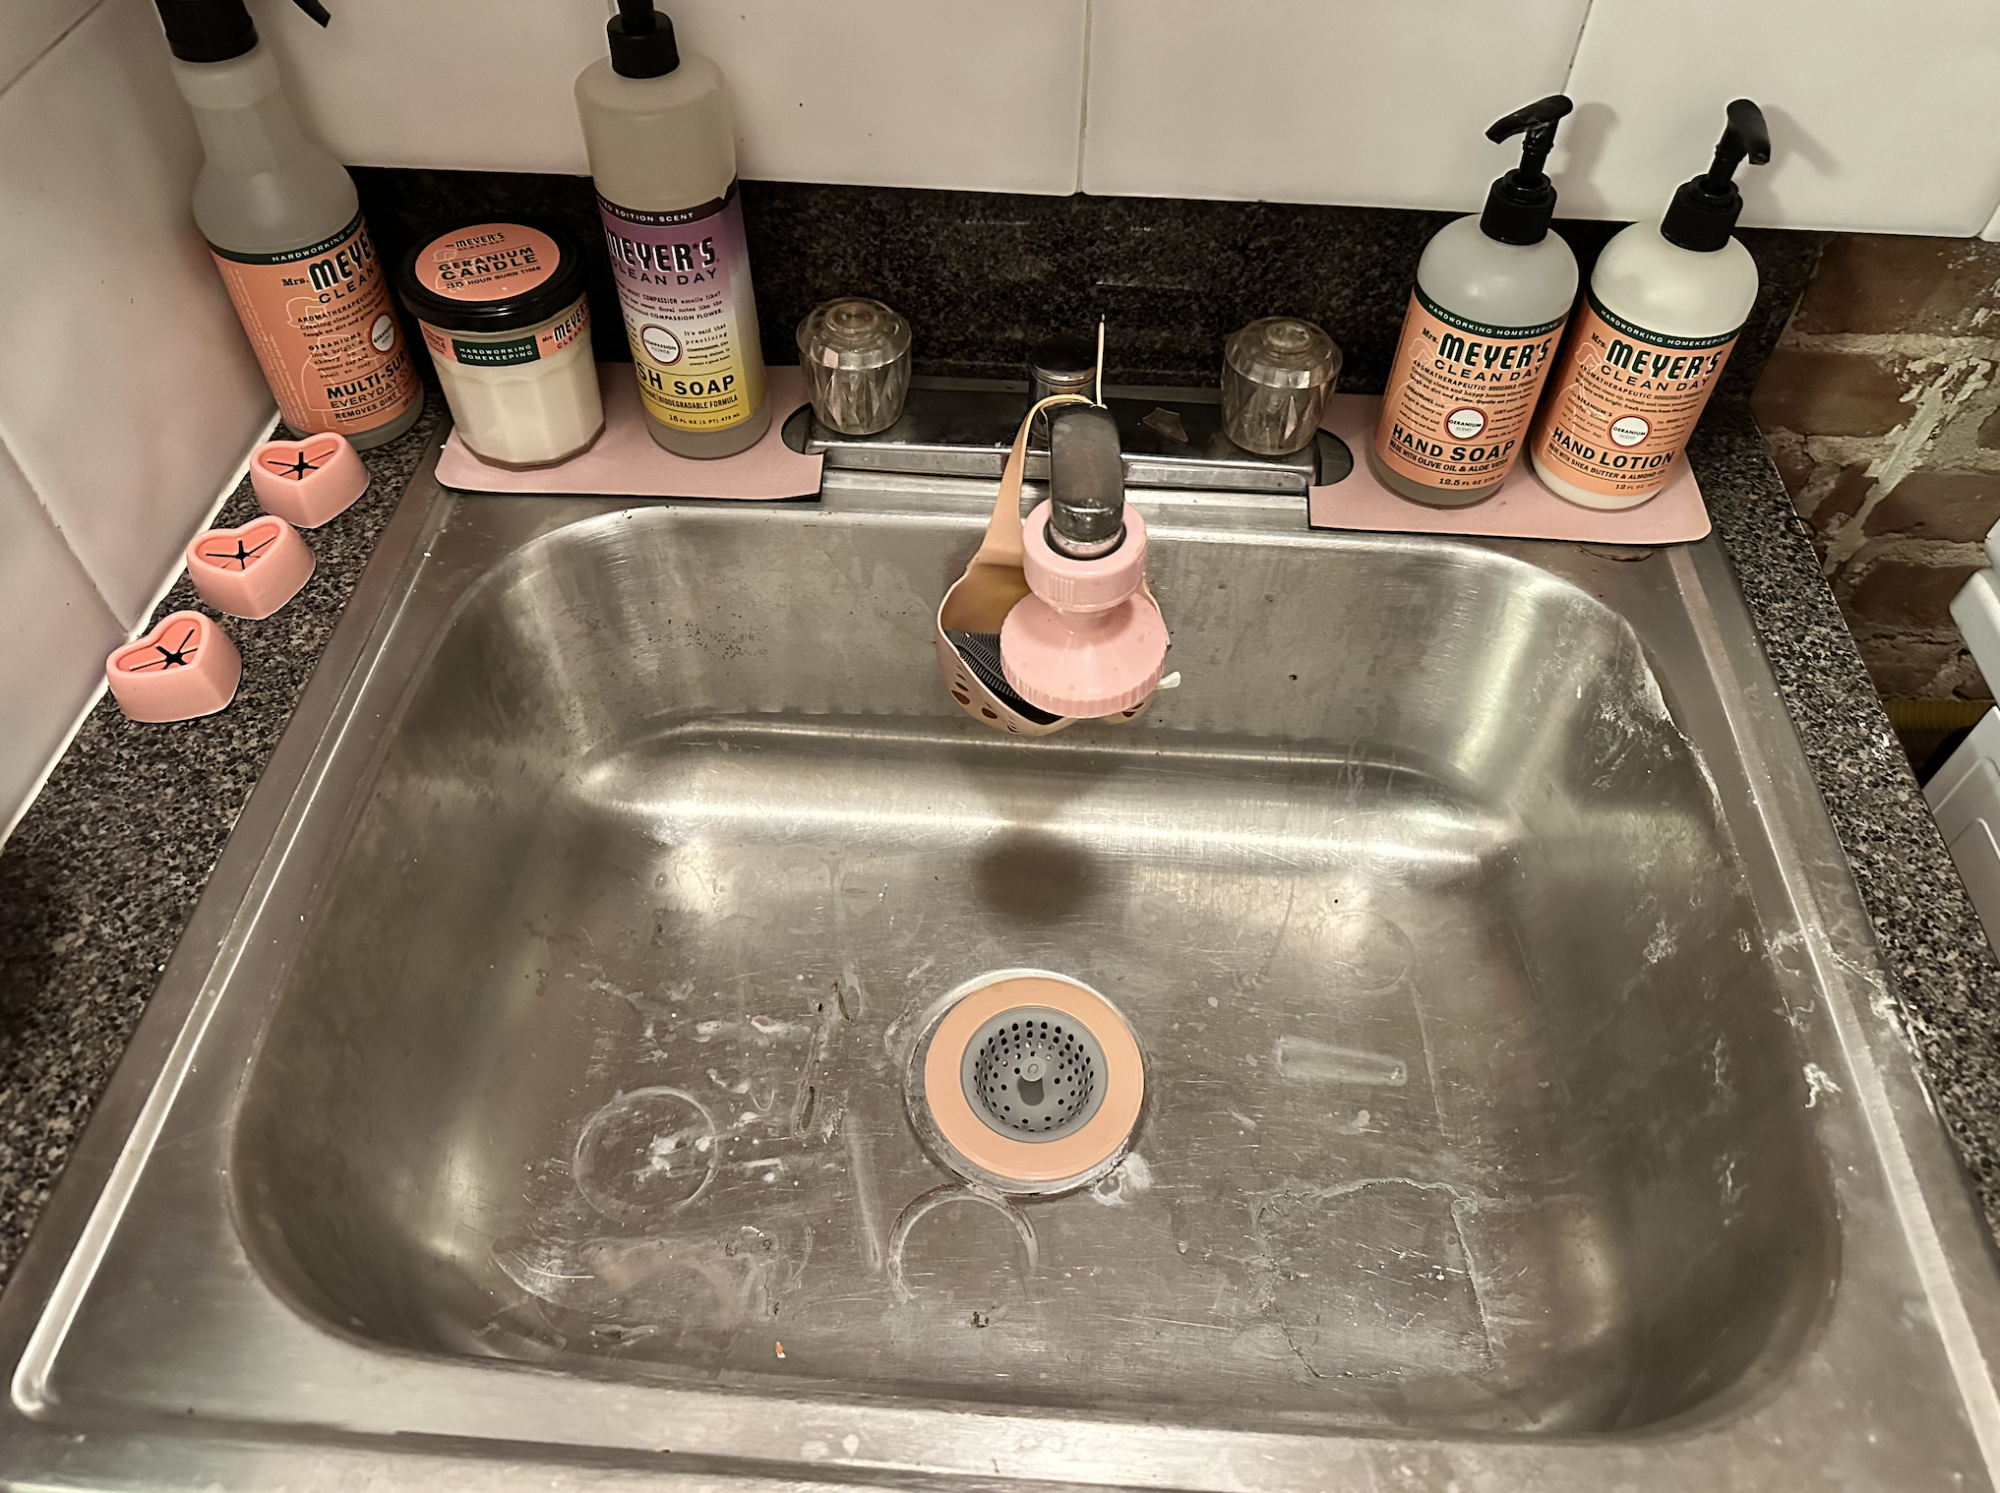 A dirty stainless steel sink